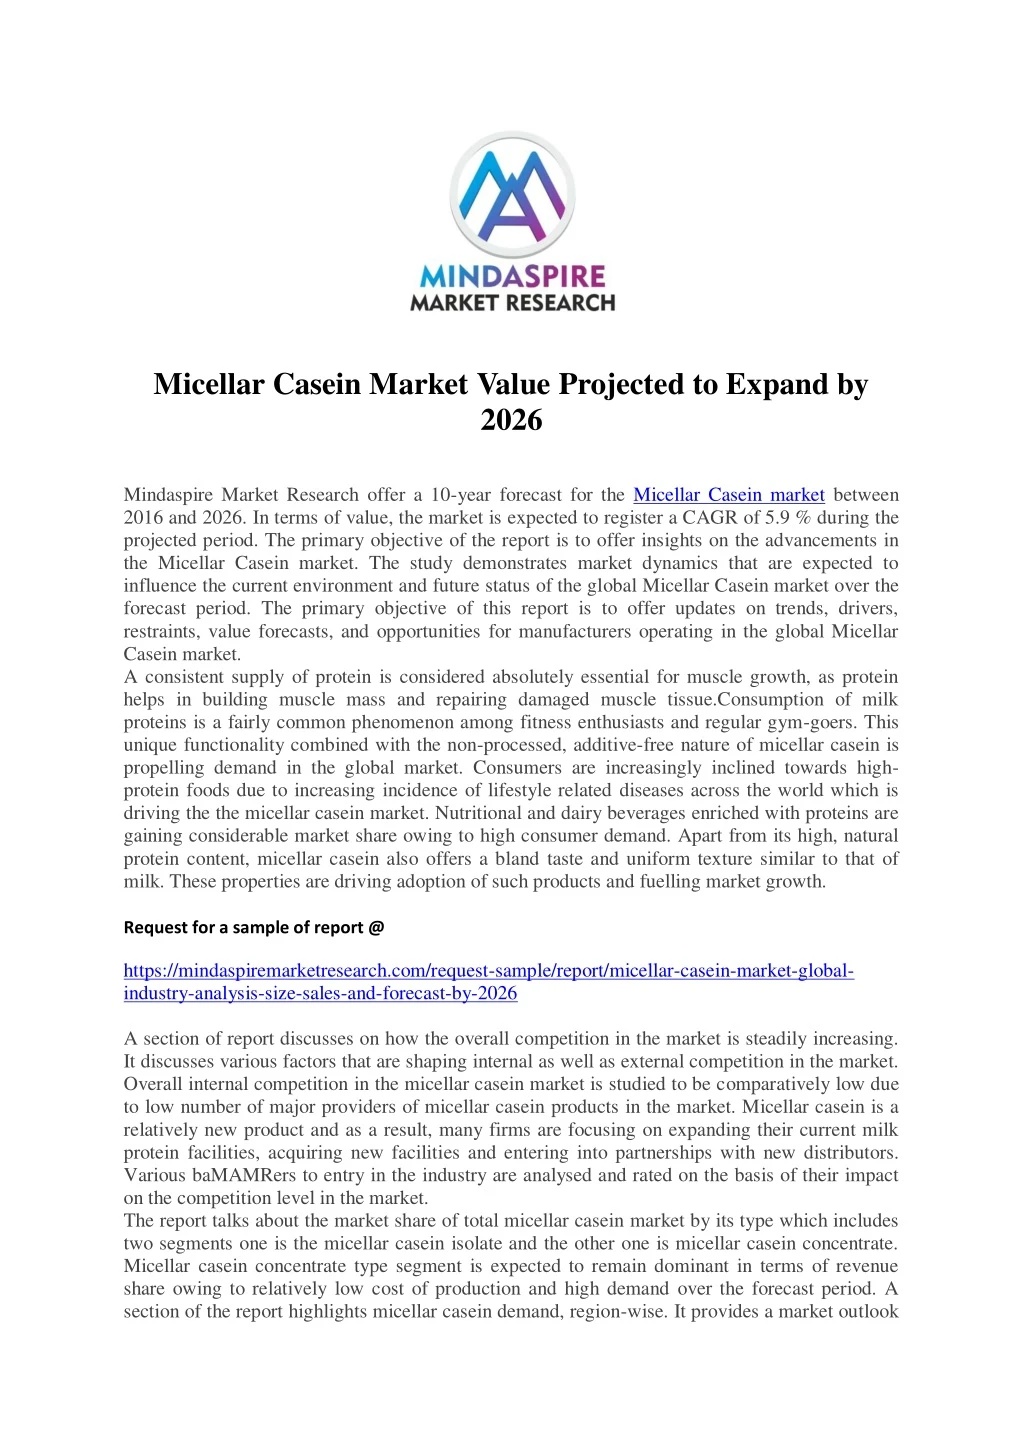 micellar casein market value projected to expand